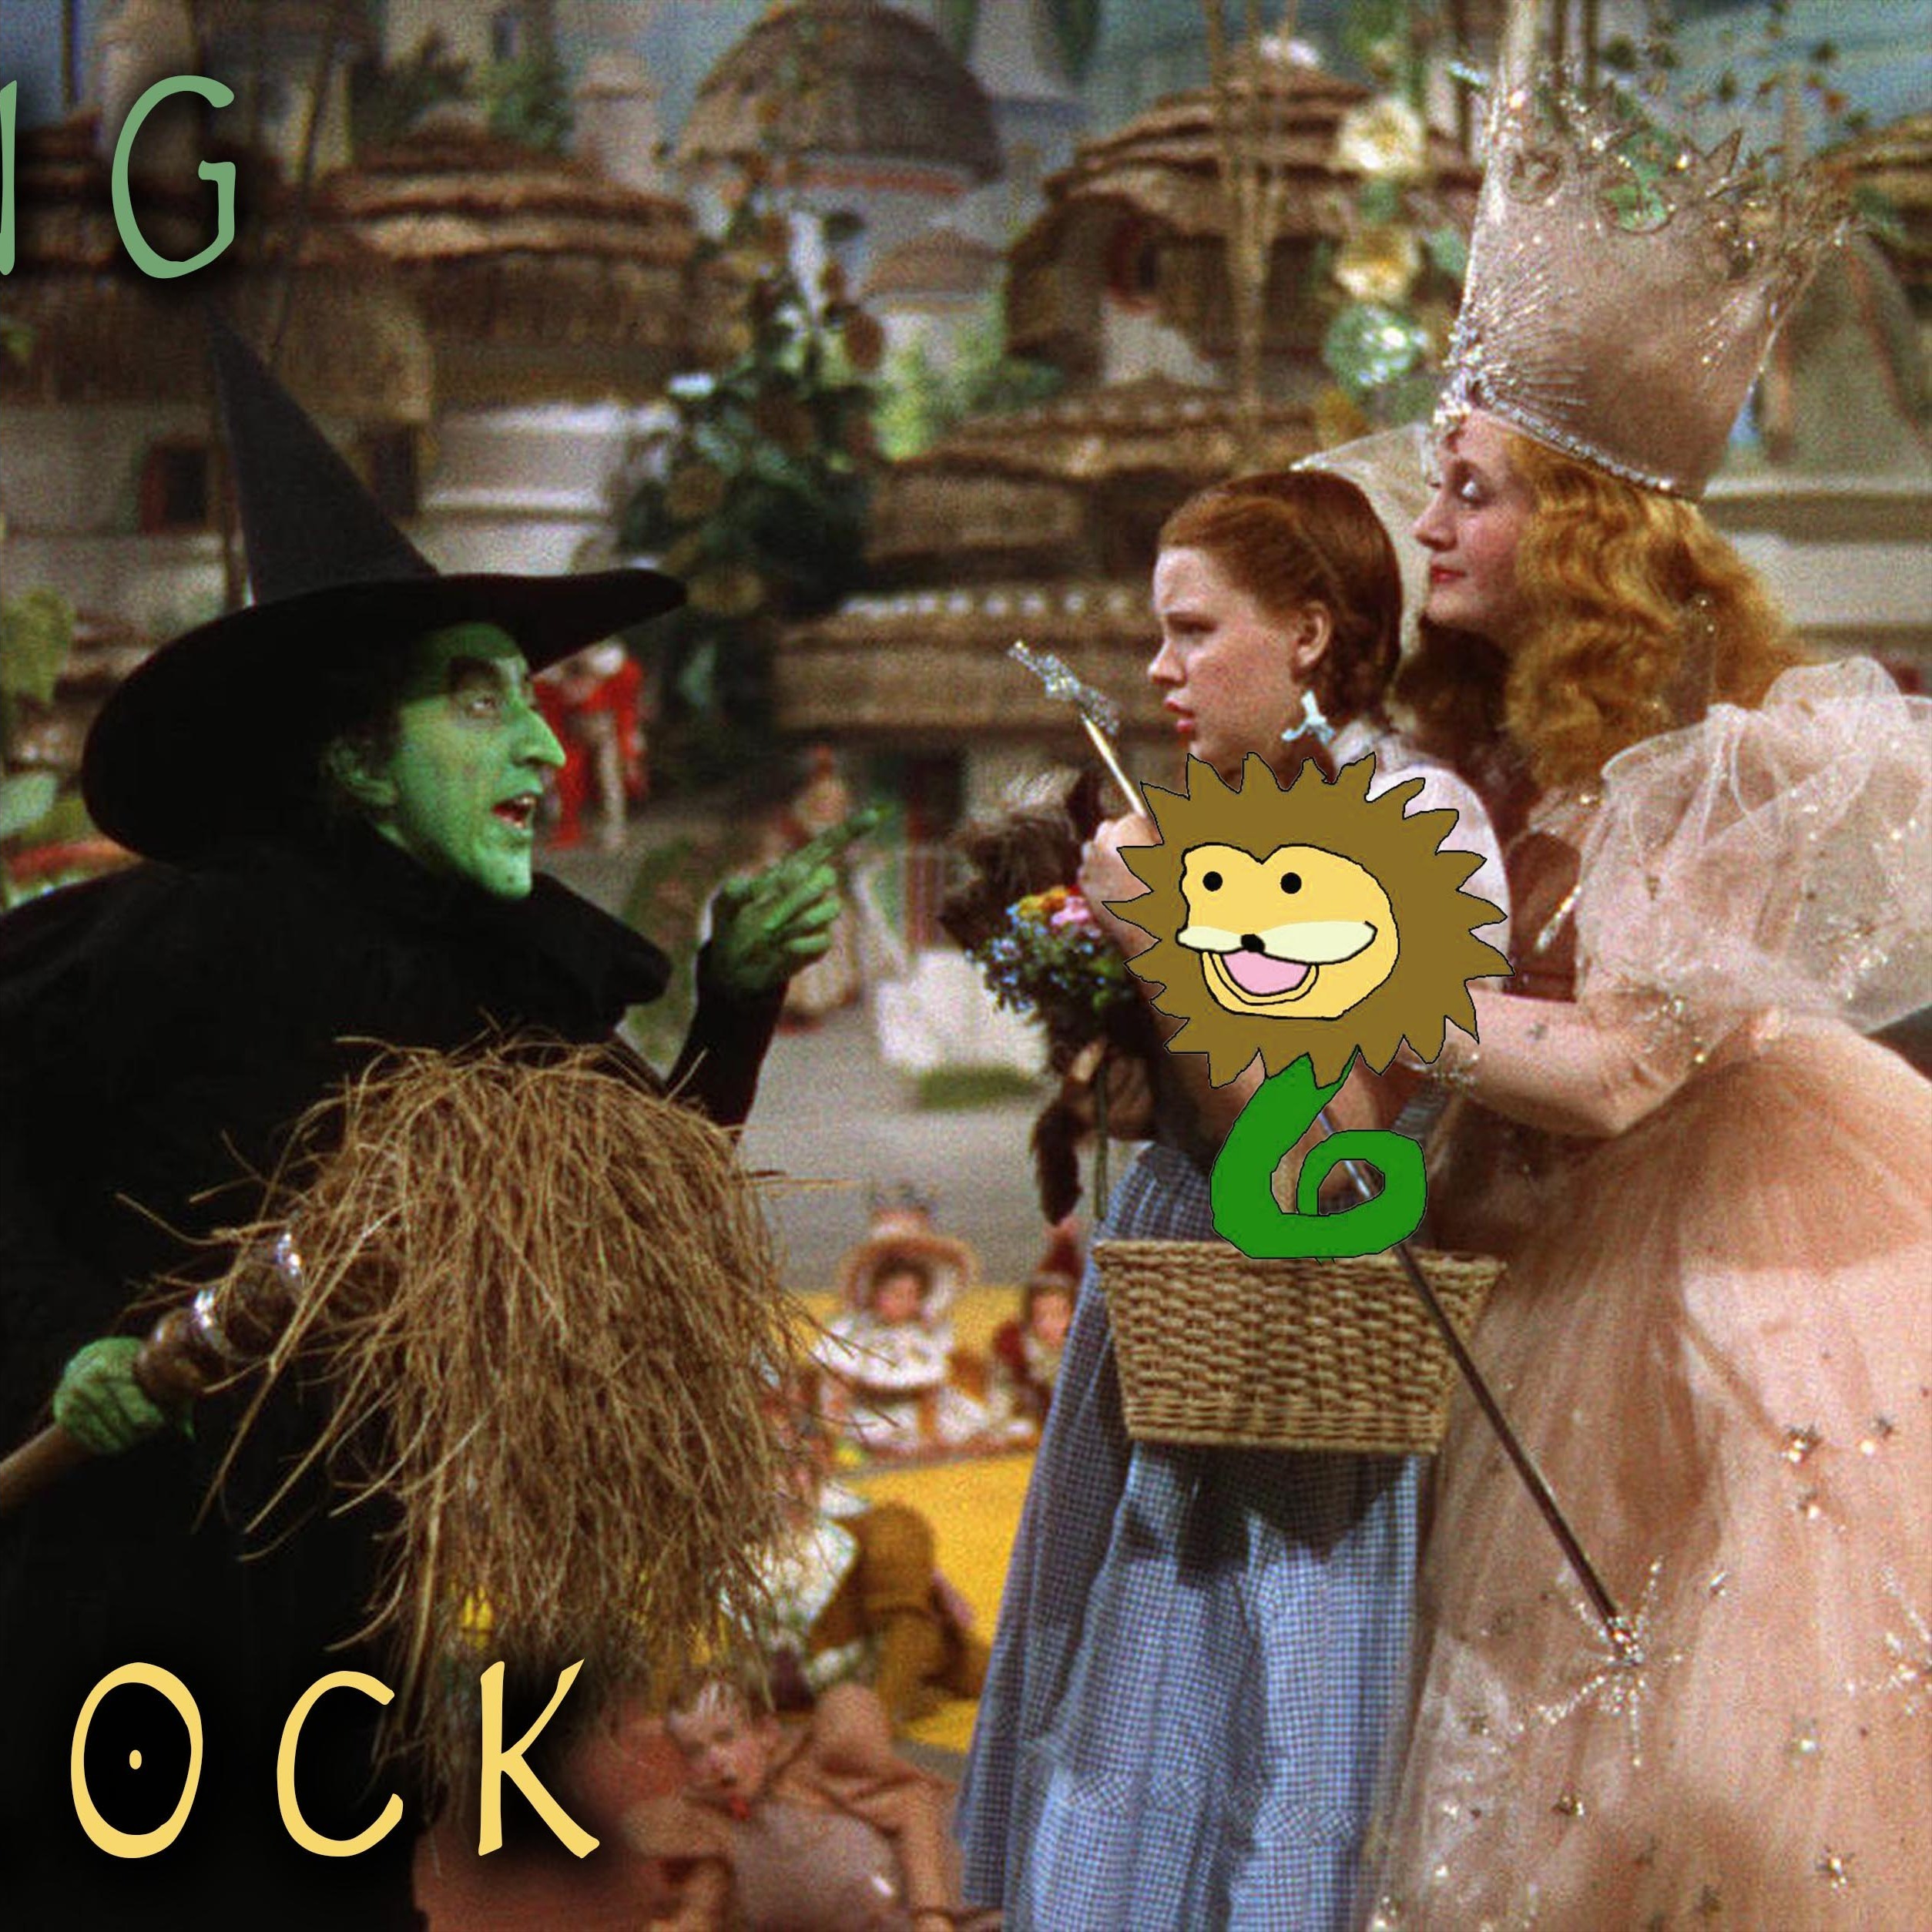 David Block on Decoding Occult Secrets in The Wizard of Oz